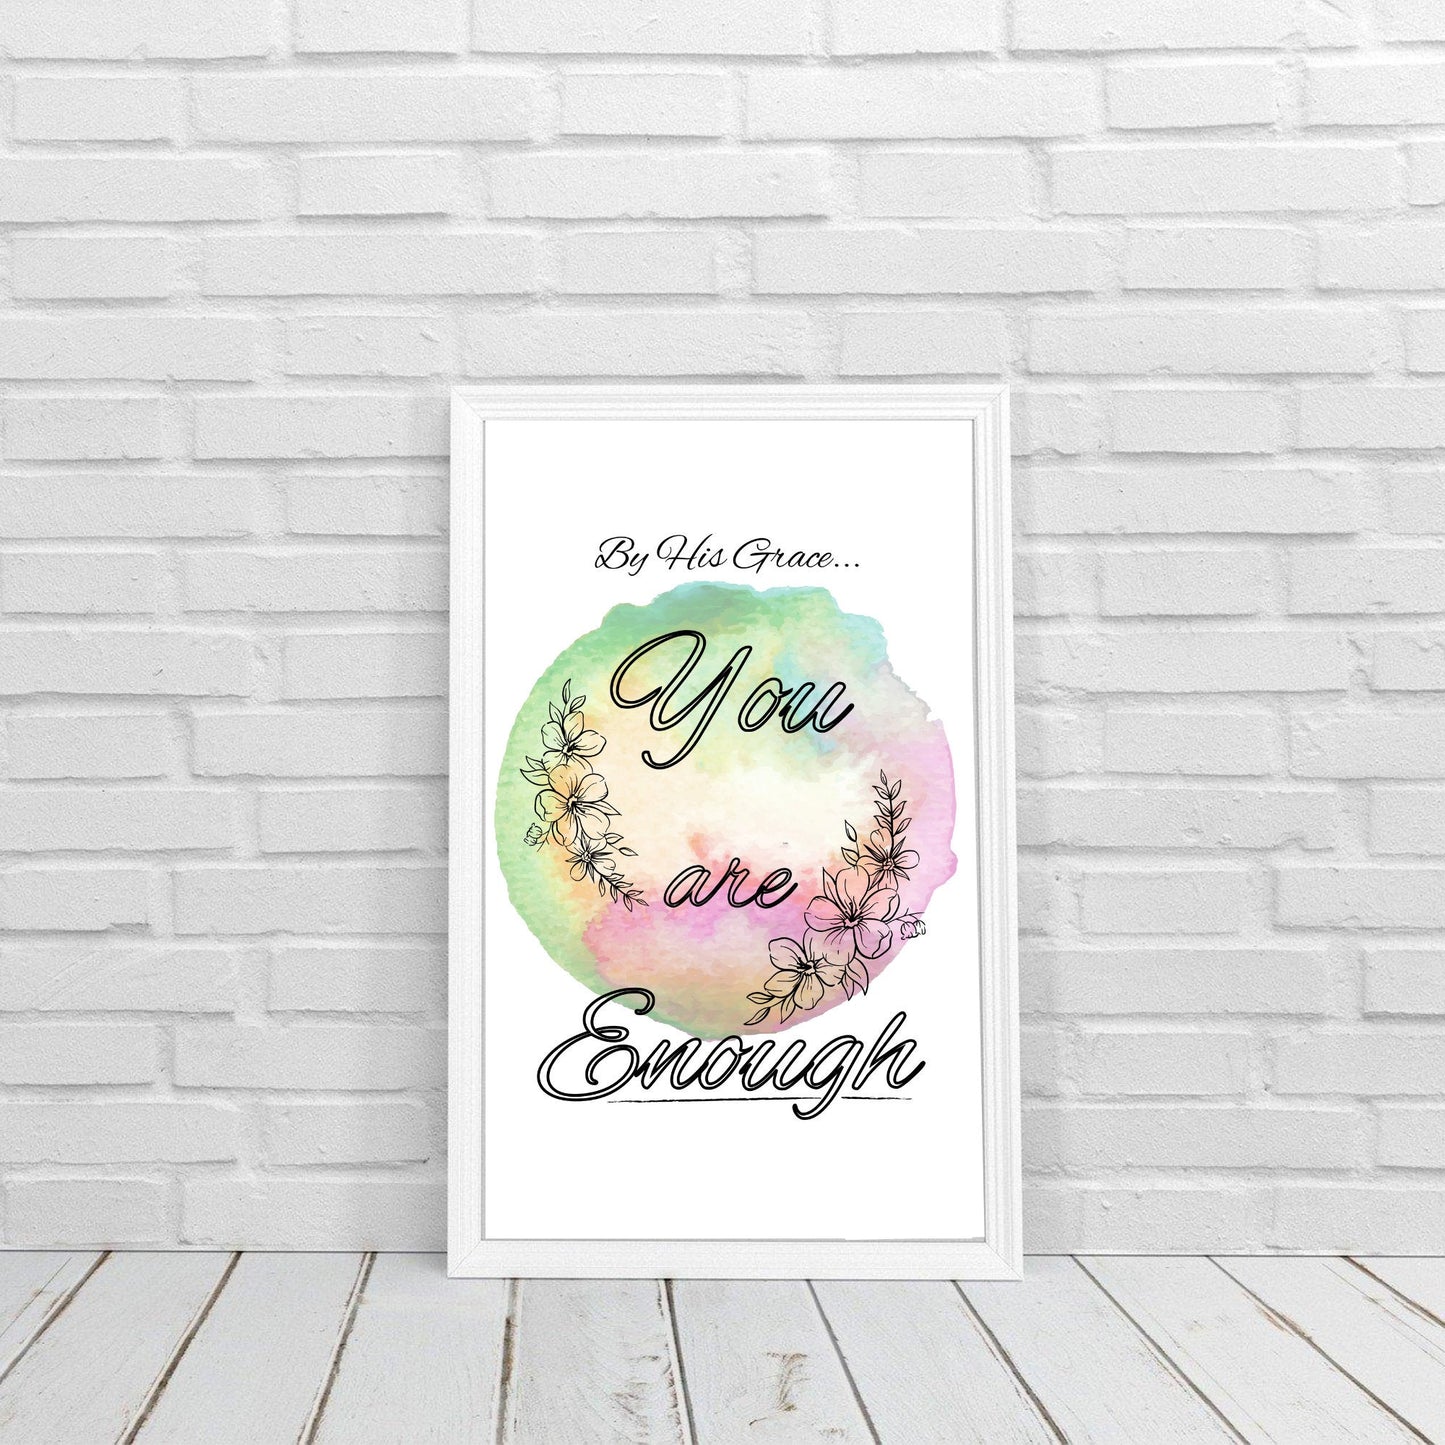 Instant-Download Watercolor Typography Print in Rainbow, Printable, Home/Office/Home Office/Bedroom/Living Room Wall Art Print